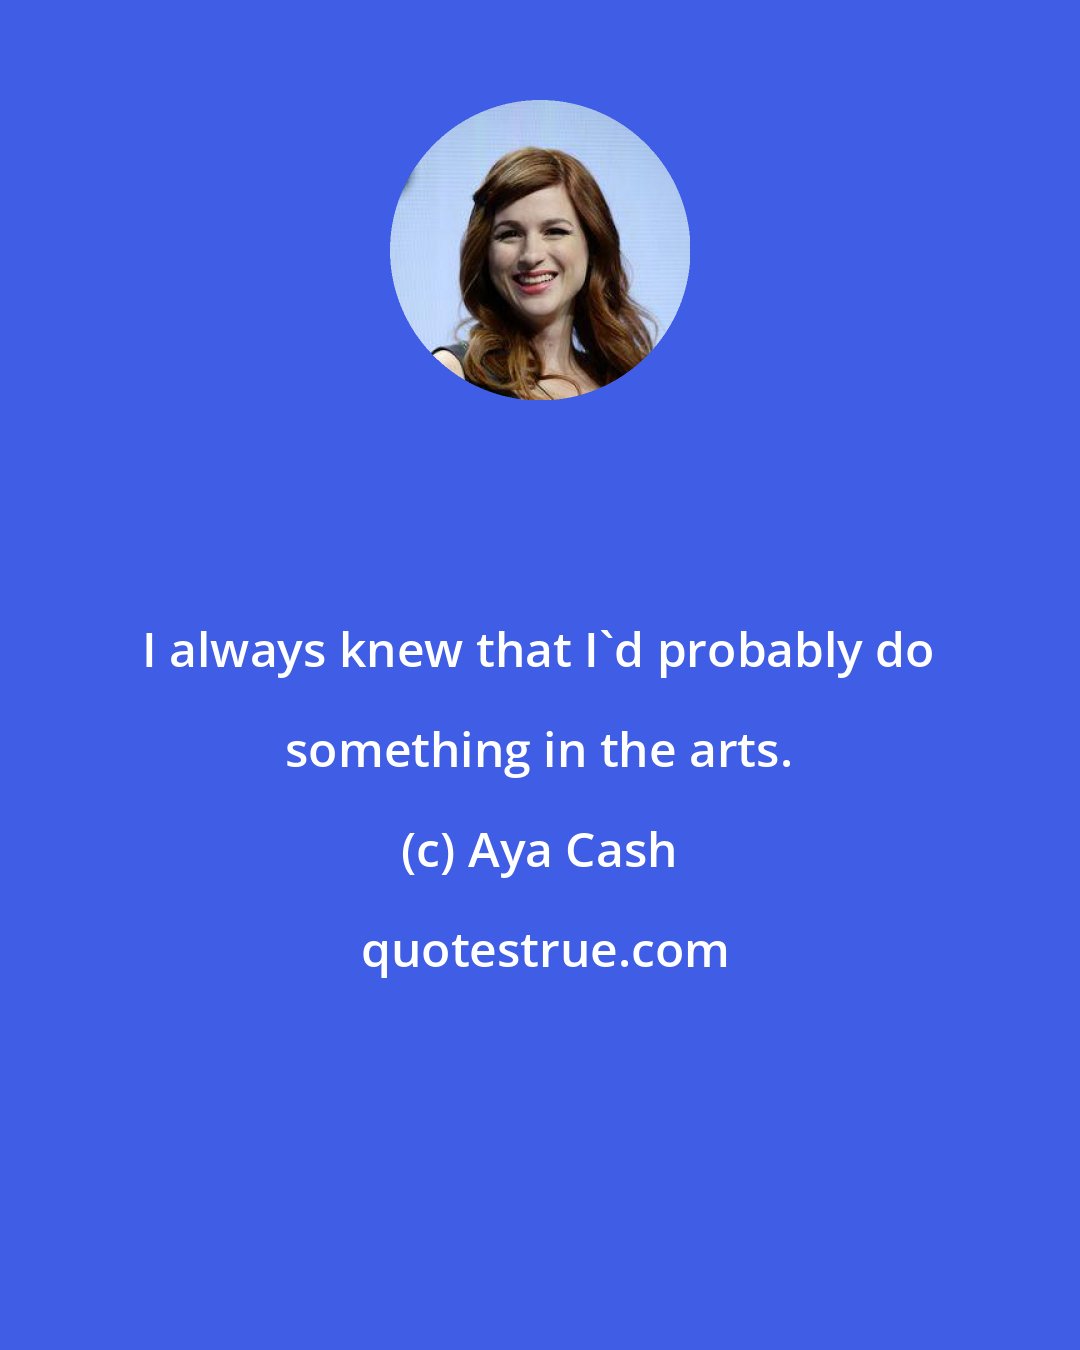 Aya Cash: I always knew that I'd probably do something in the arts.